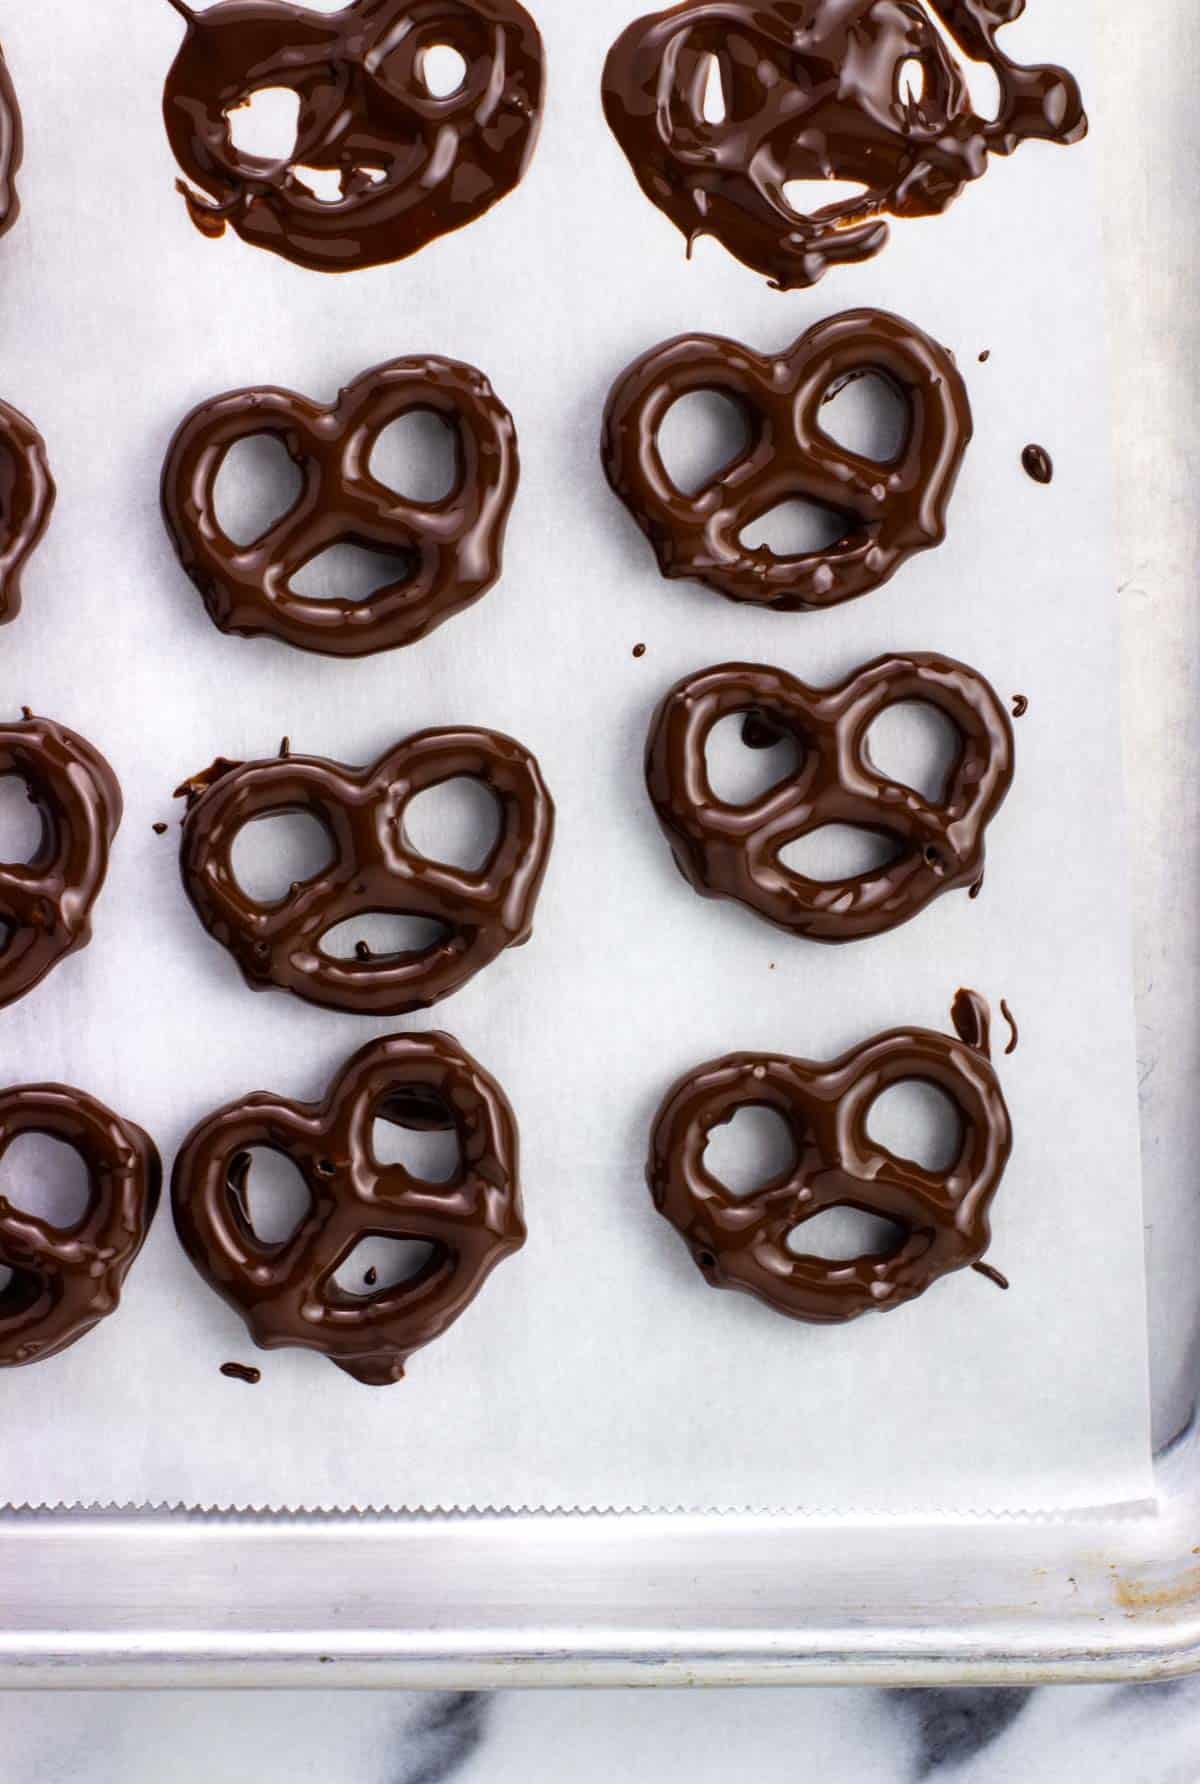 Dipped chocolate peppermint pretzels drying on a sheet of parchment paper.